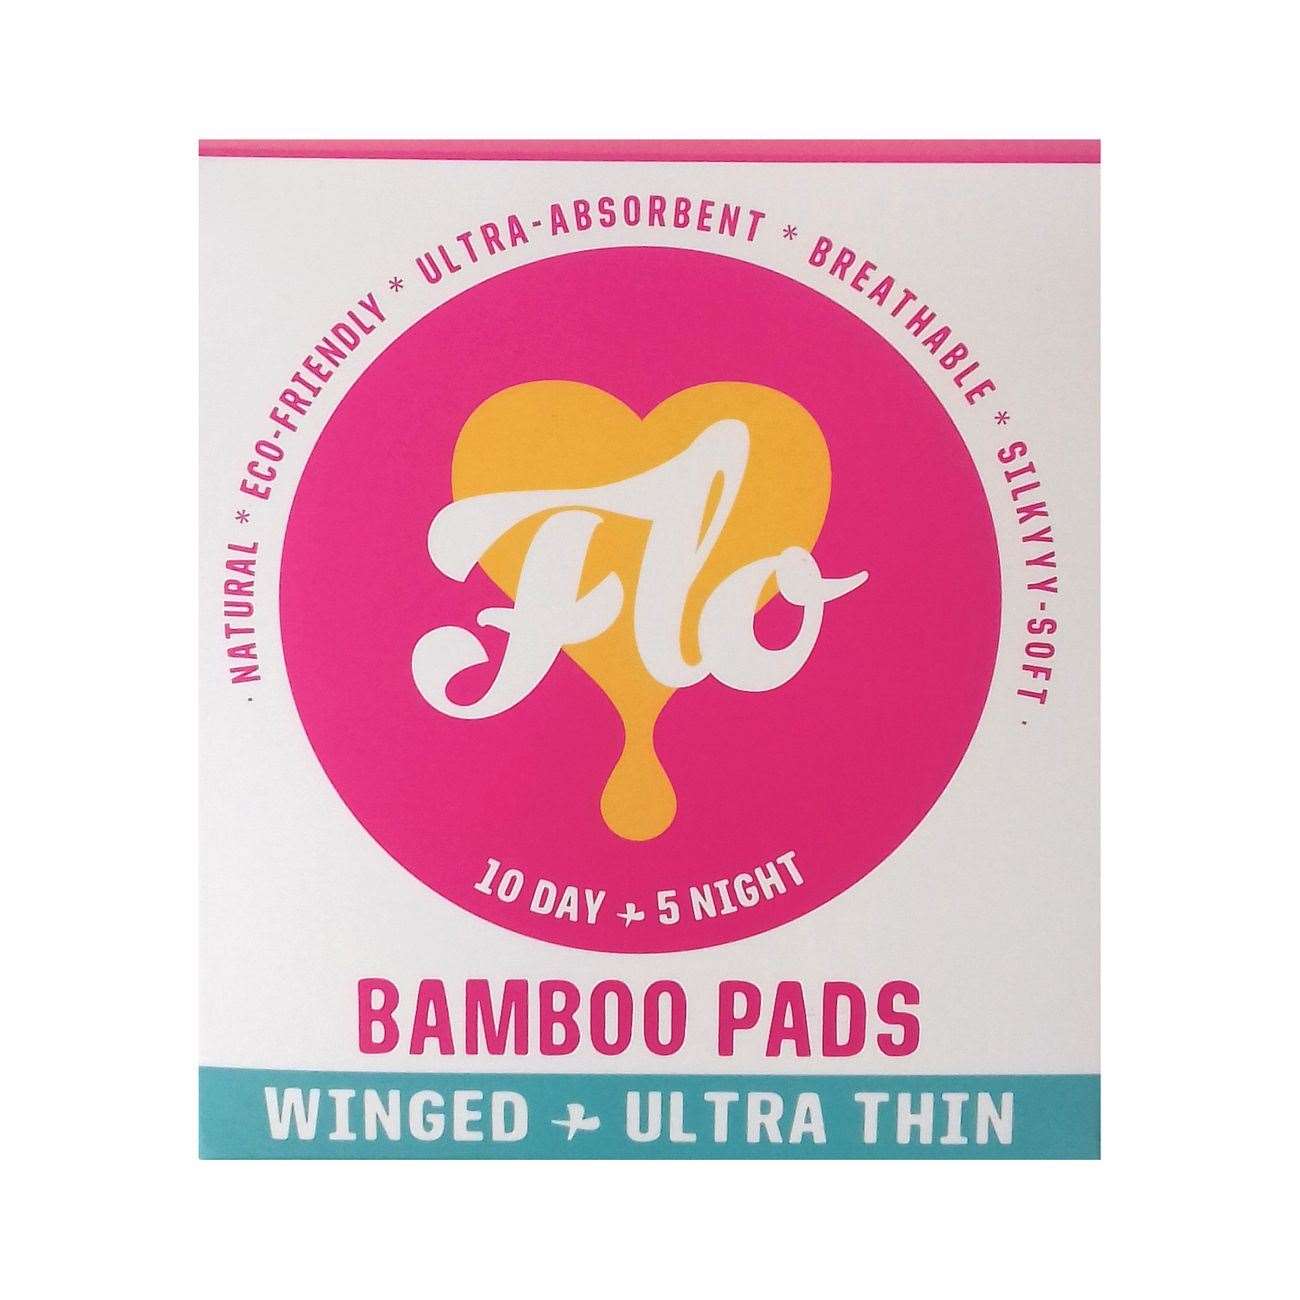 Bamboo Pads Winged & Utra Thin 10 Day & 5 Night Pads